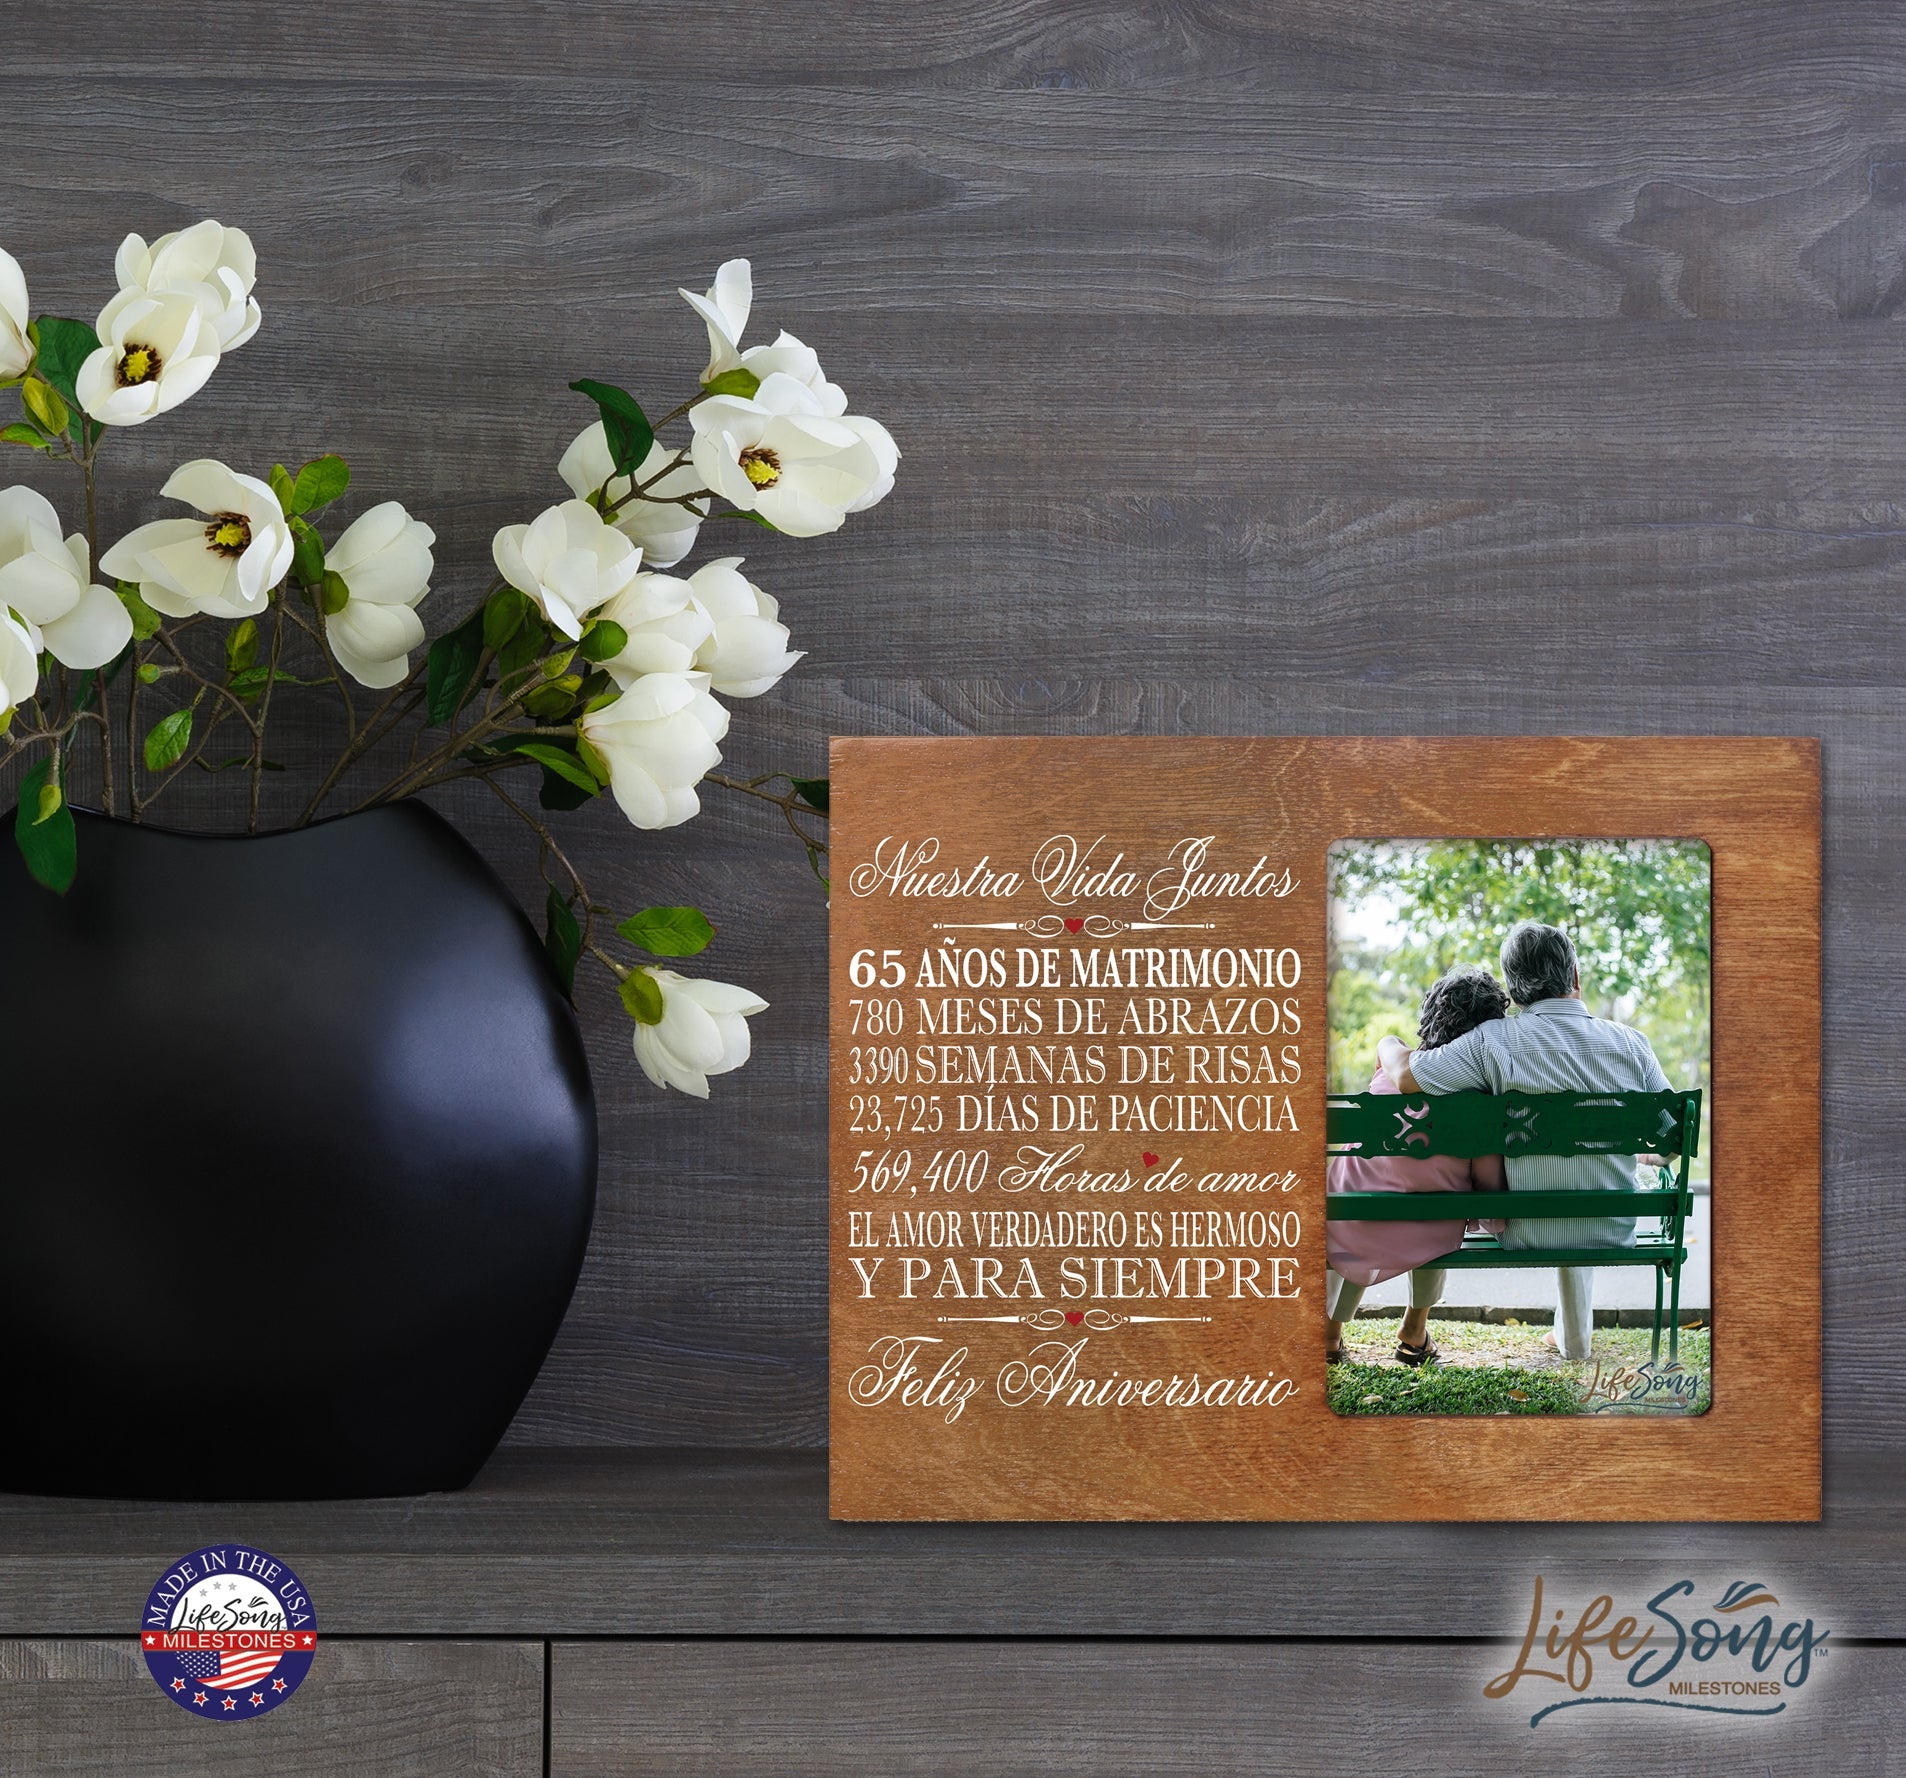 Unique 65th Wedding Anniversary Gift Ideas for Couples – Spanish-themed frame.